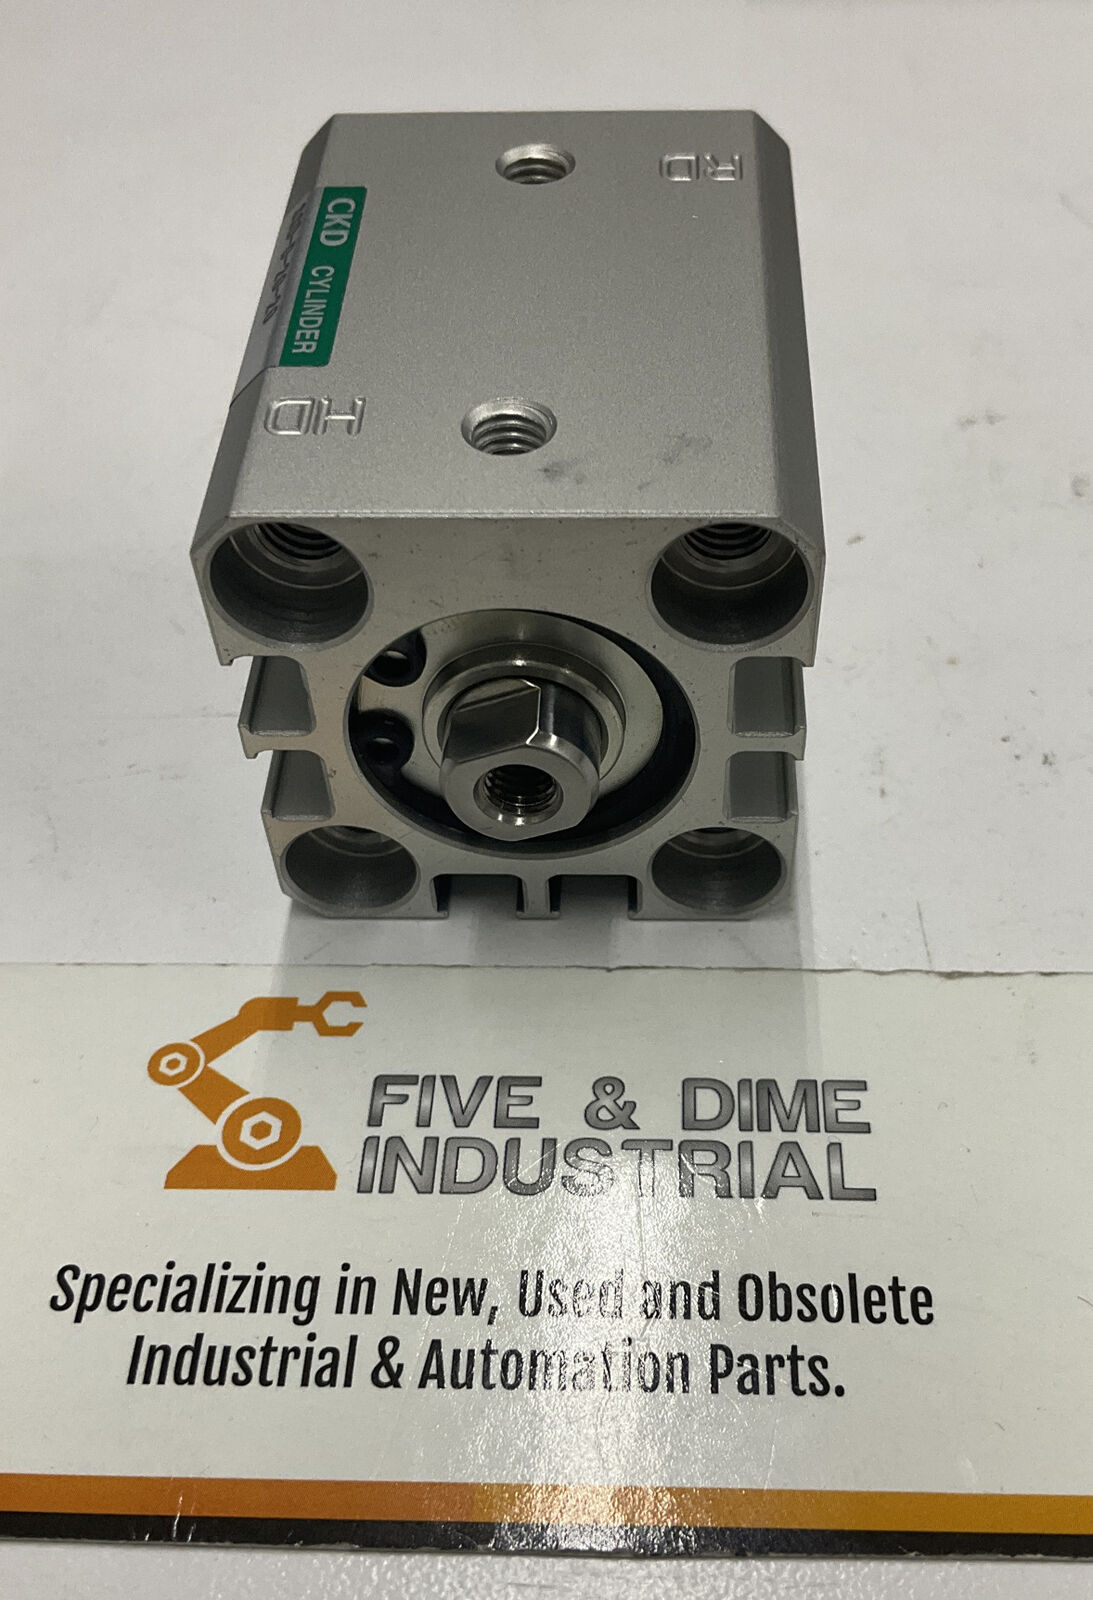 CKD SSD-20-20 Double Acting Pneumatic Cylinder 20mm Bore 20mm Stroke (YE171)